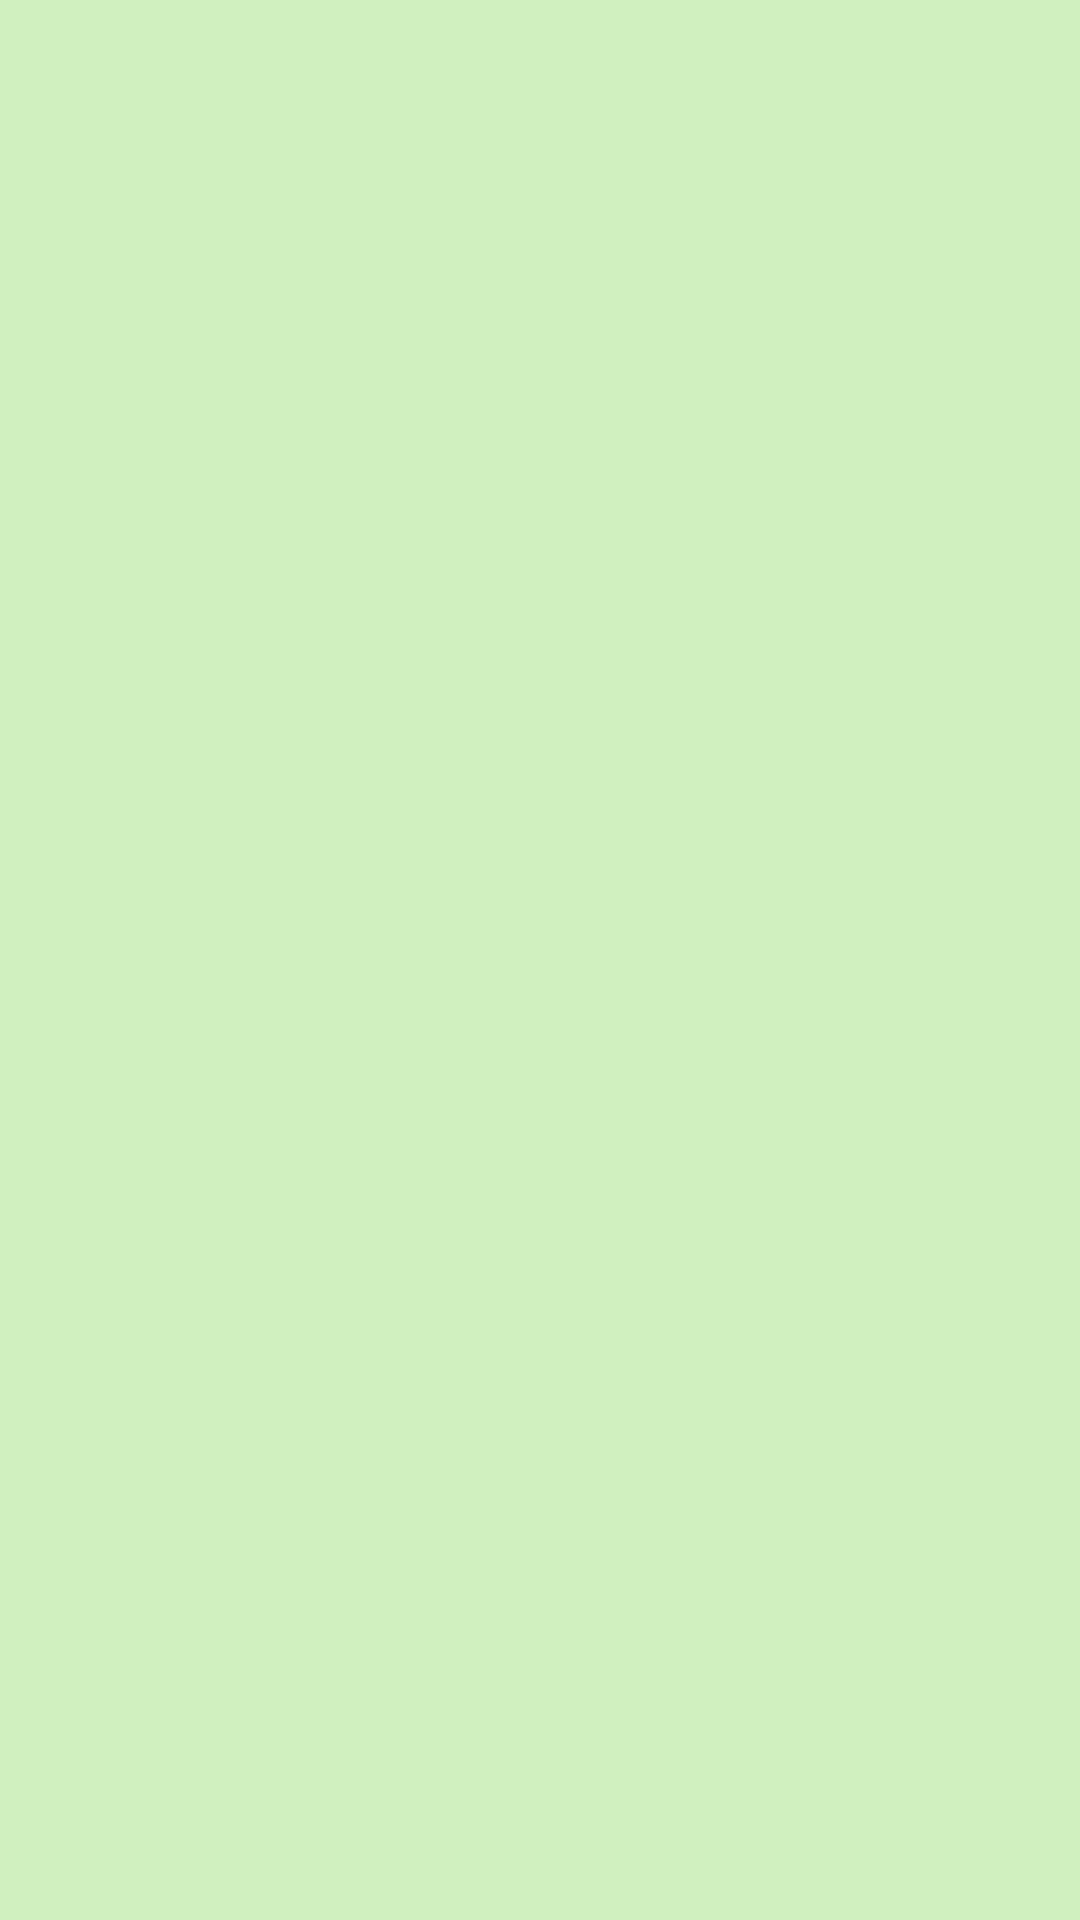 1080x1920 Tea Green Solid Color Background